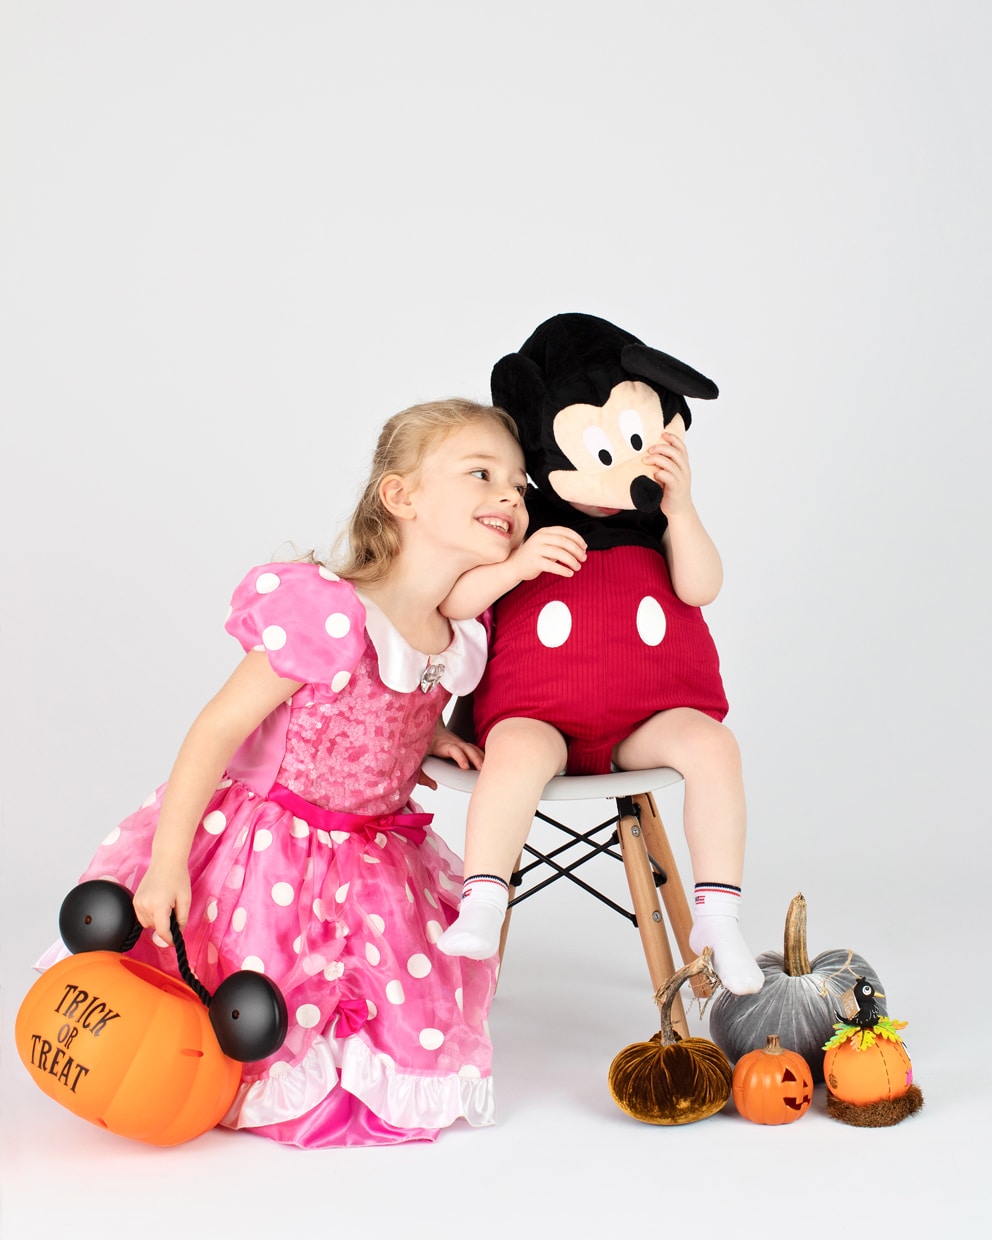 brother and sister dressed up like Minnie and Mickey Mouse for halloween